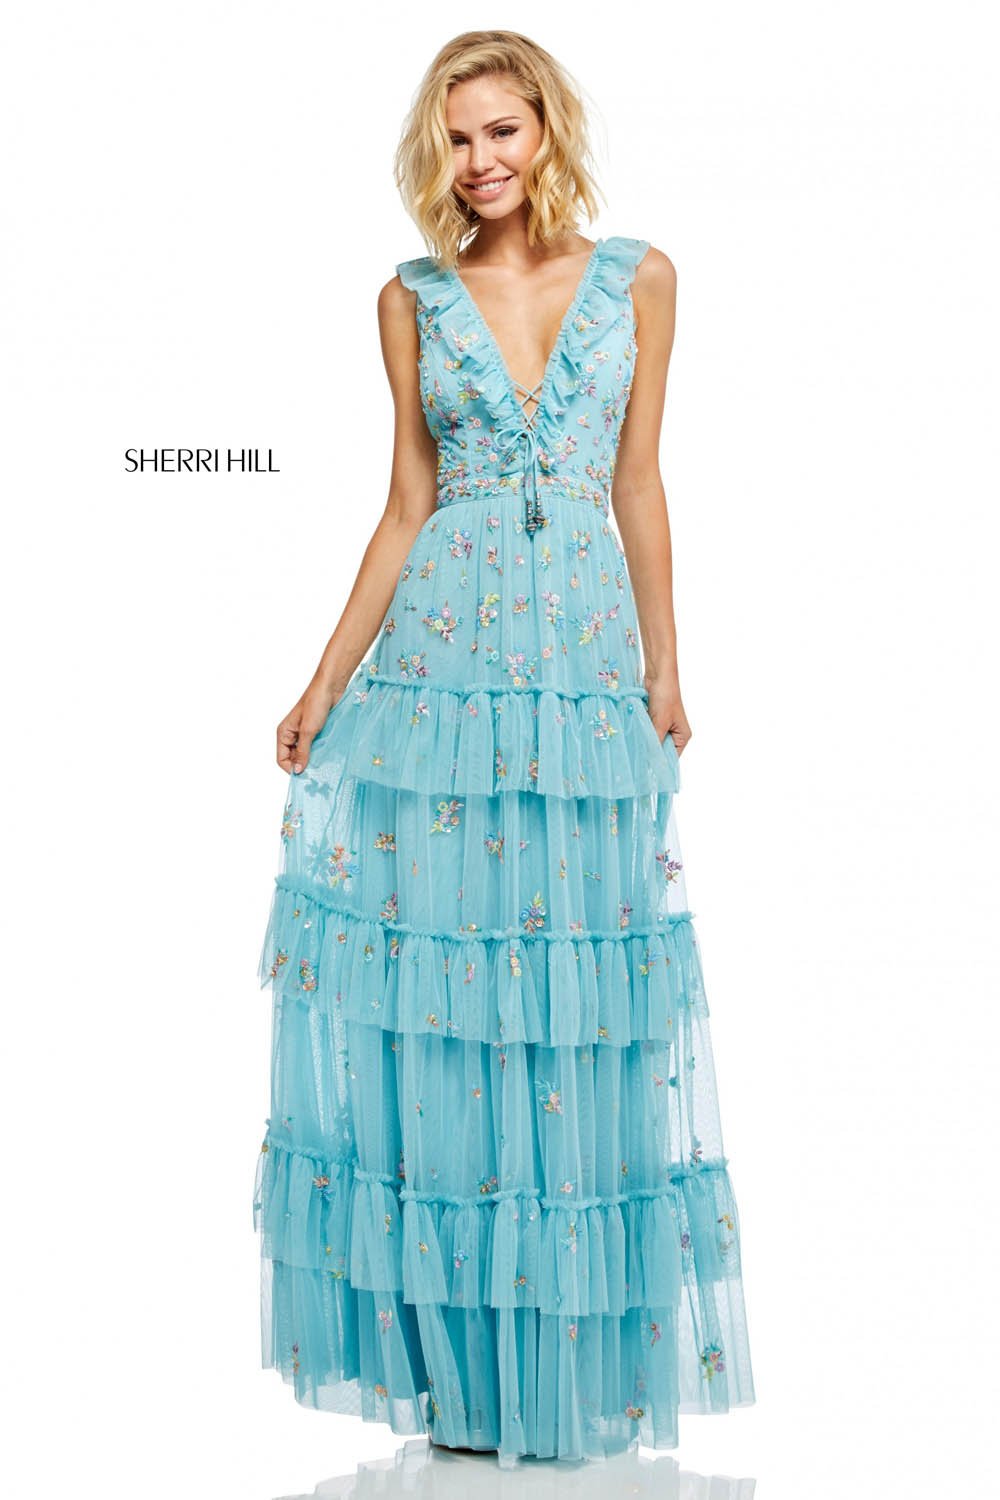 Sherri Hill 52884 dress images in these colors: Light Blue, Black, Coral, Yellow.